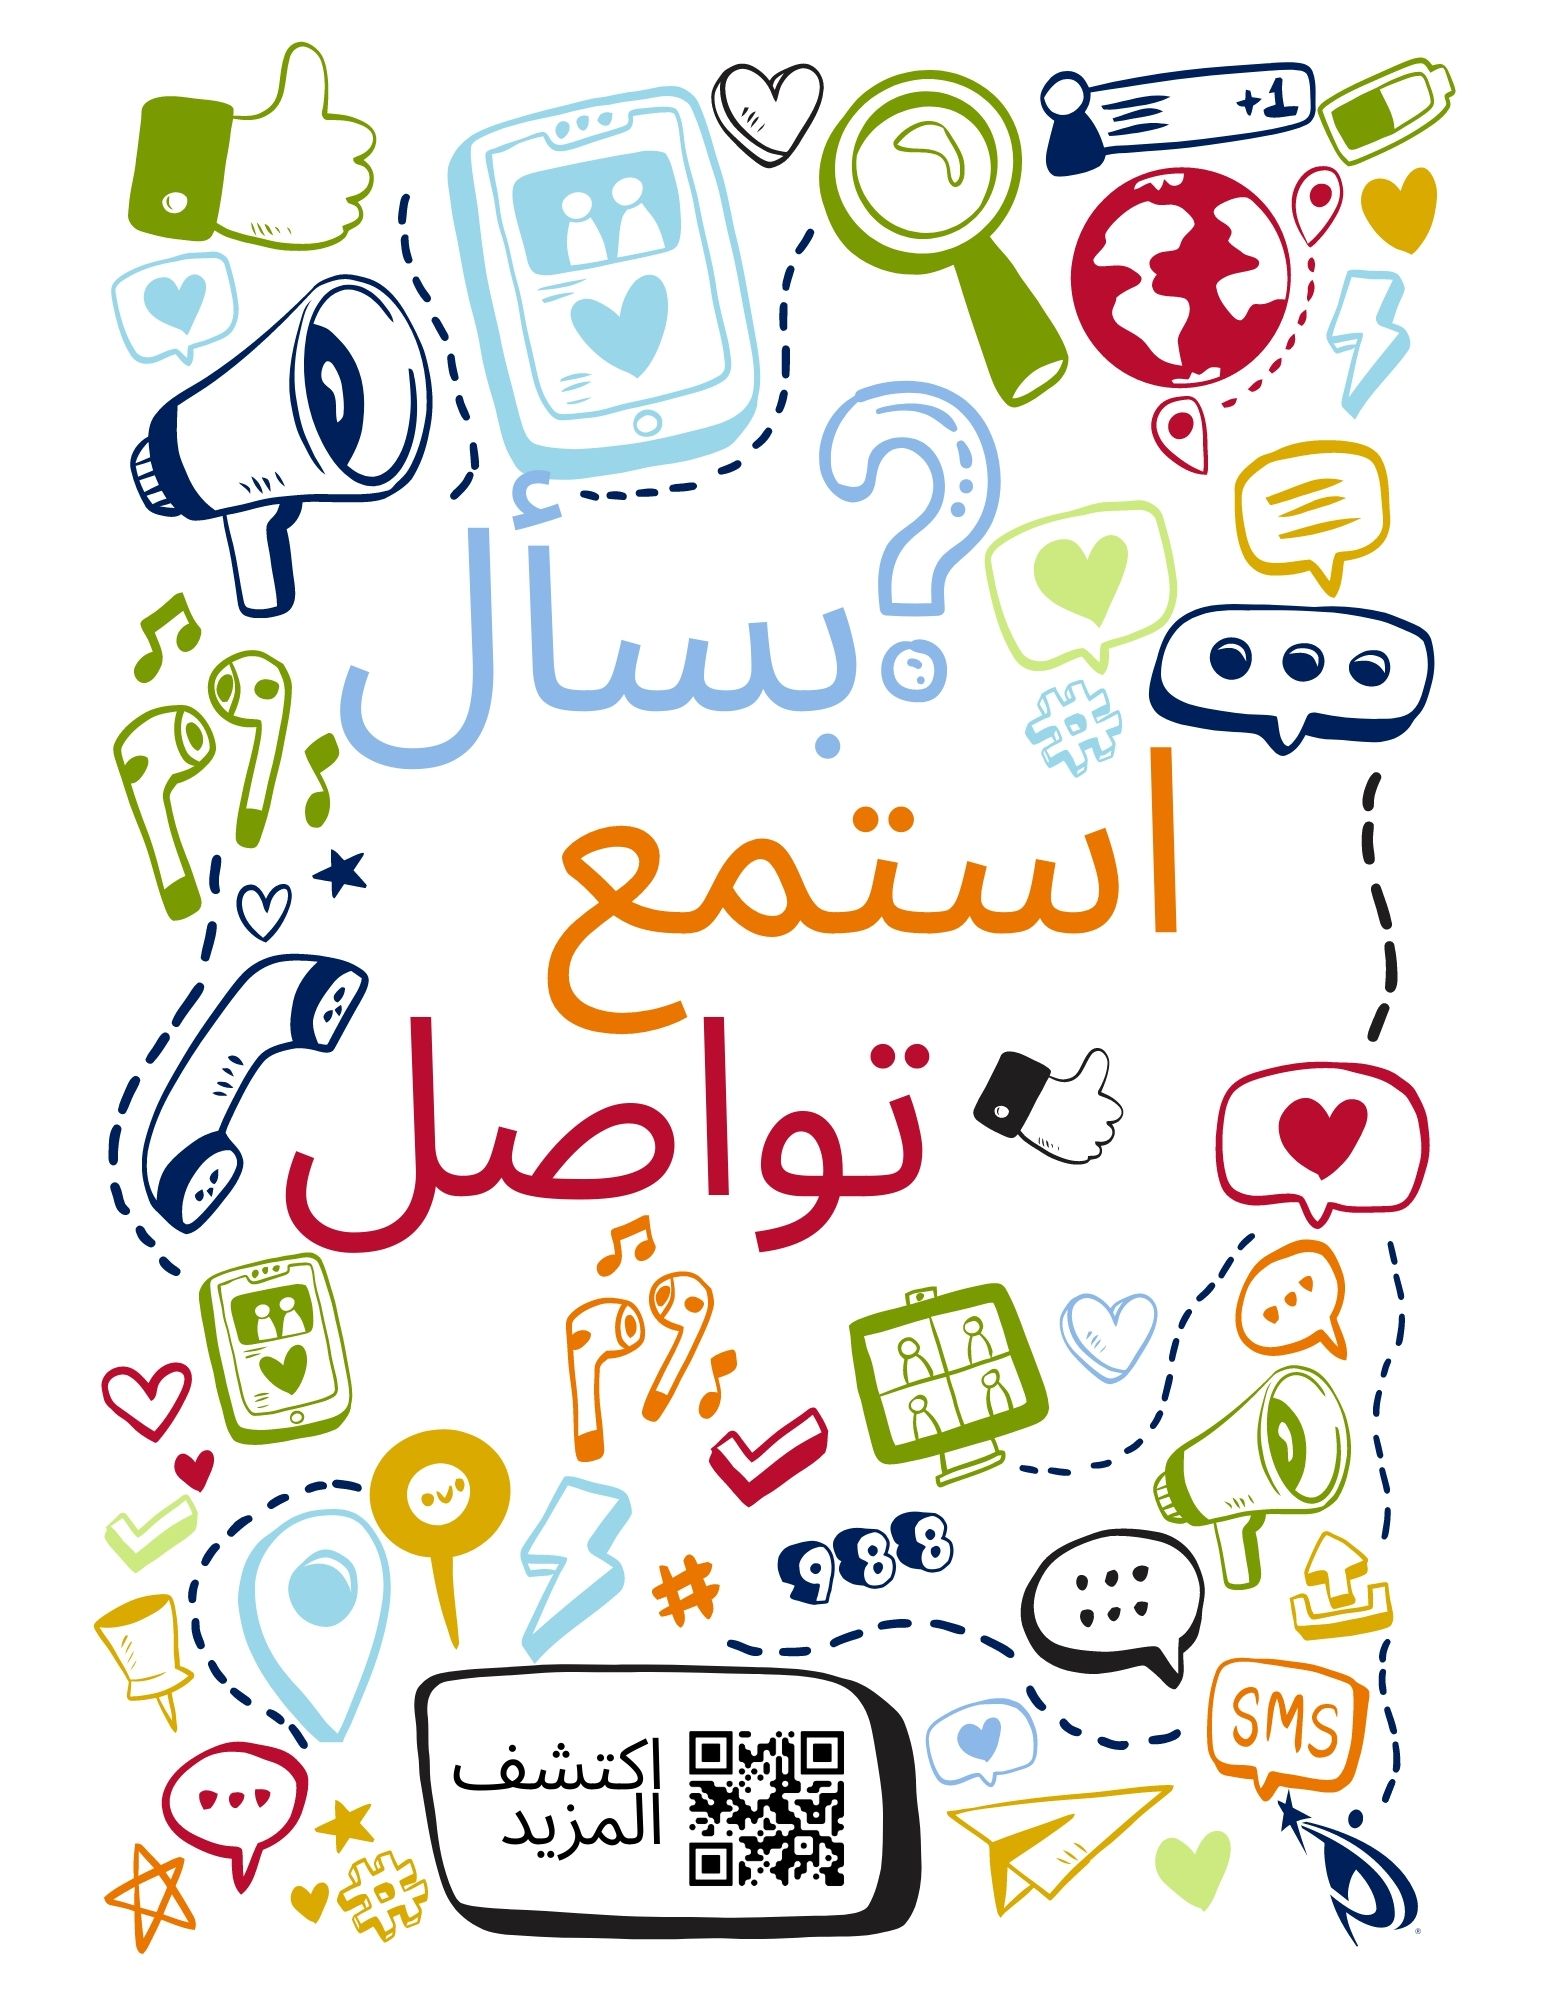 Ask, Listen Connect with graphics poster in Arabic.